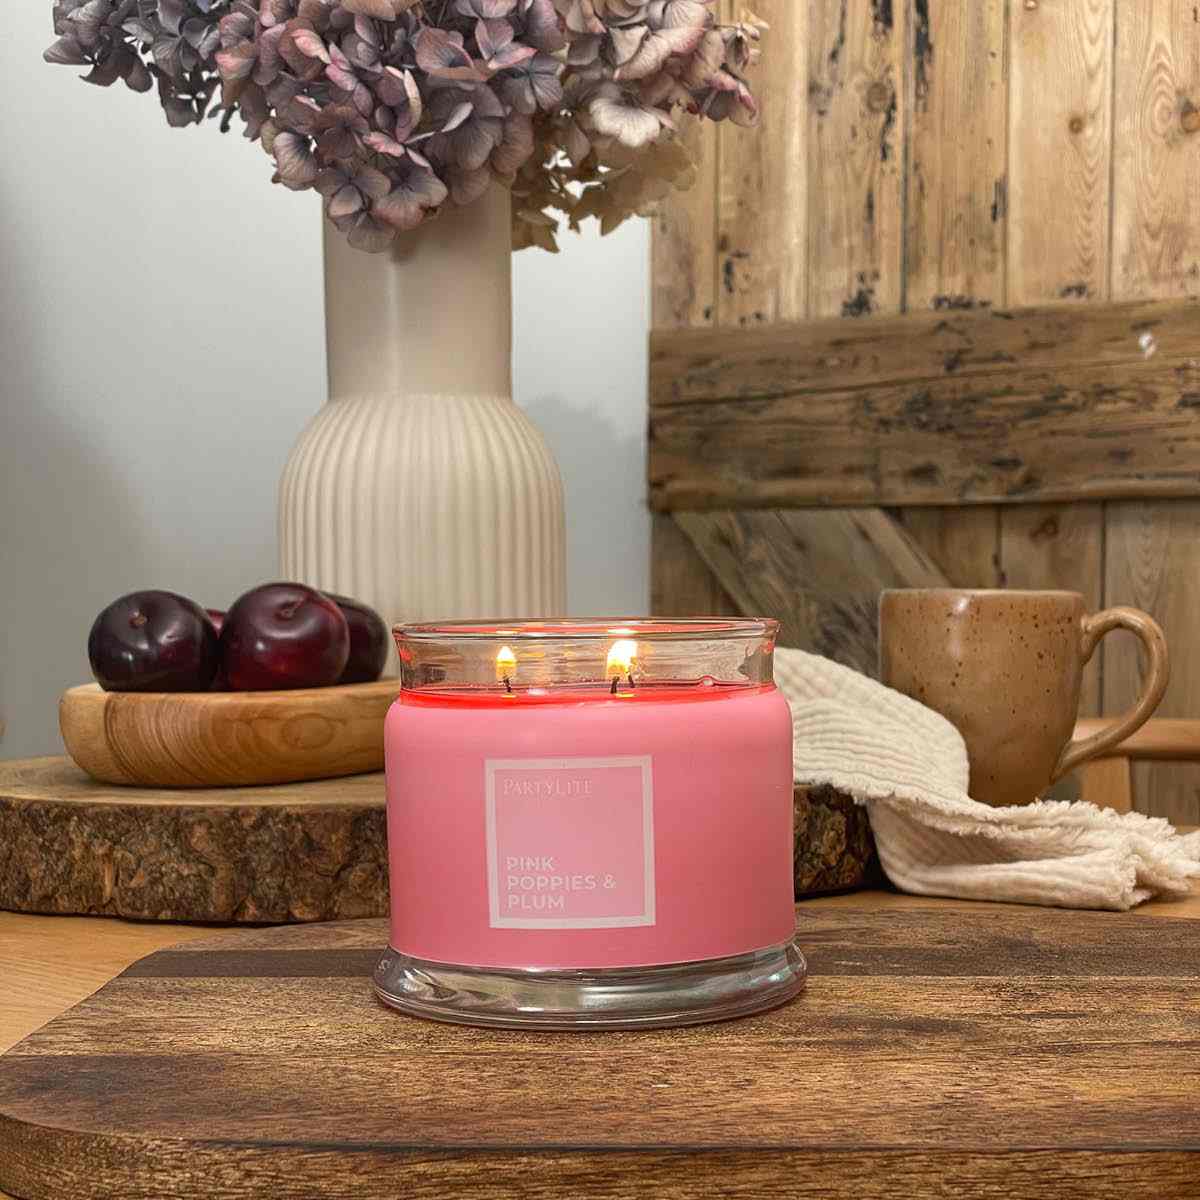 Pink Poppies &amp; Plum 3-Wick Jar Candle